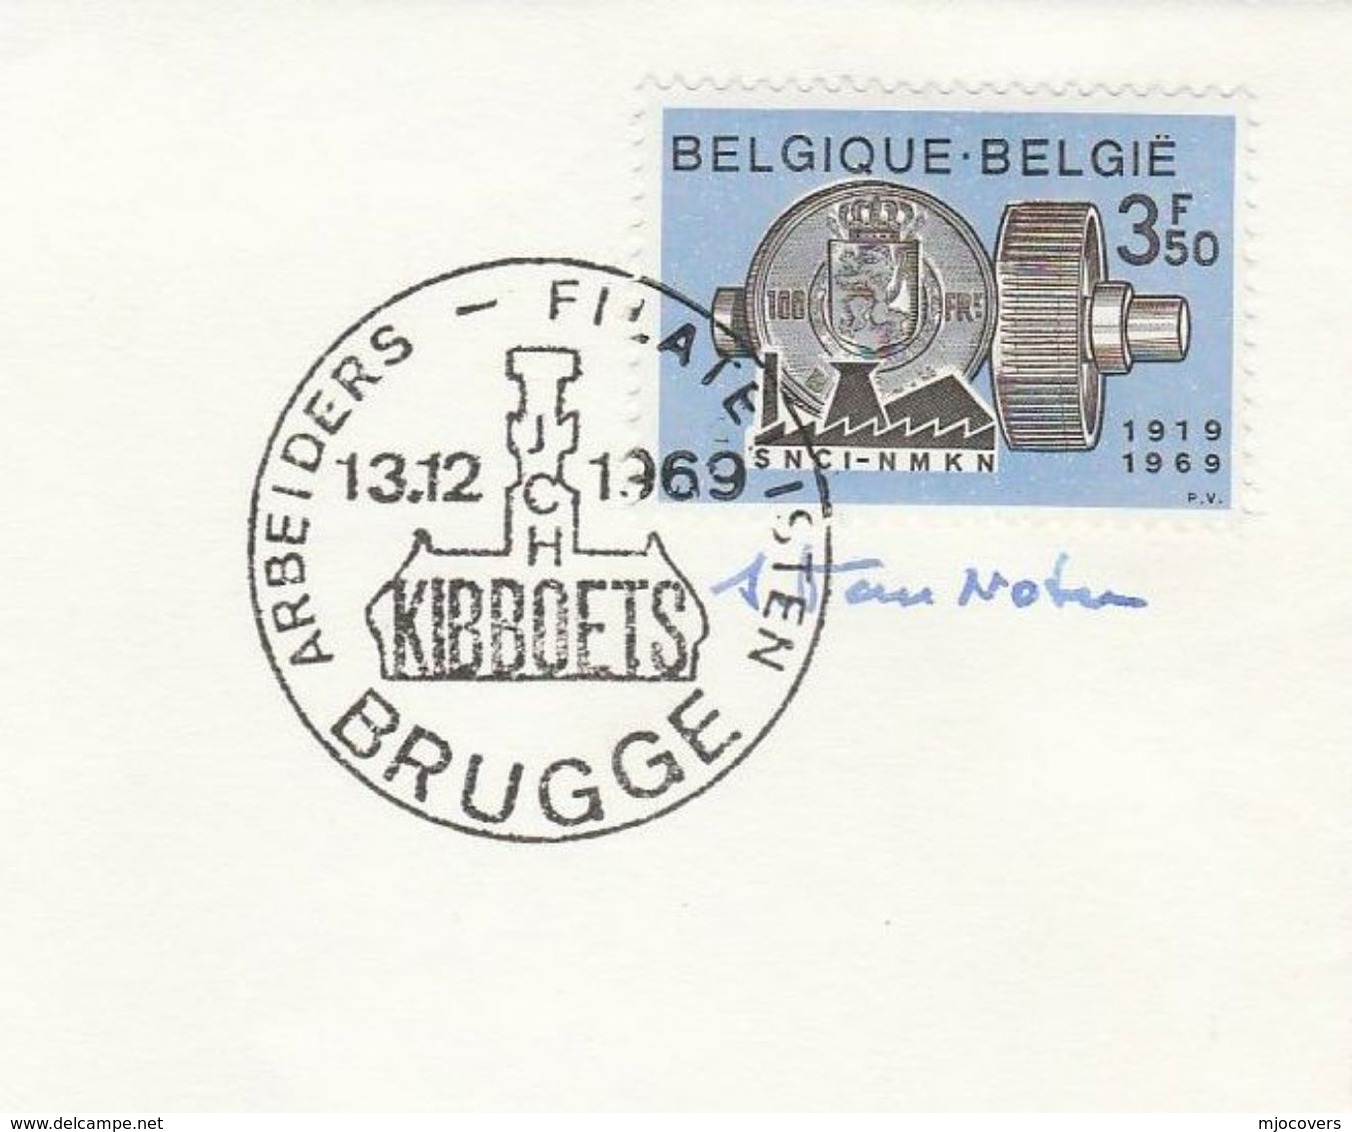 1969 - SIGNED - FDC BELGIUM Credit Union HERALDIC LION Stamps Cover SPECIAL Pmk BRUGGE - Covers